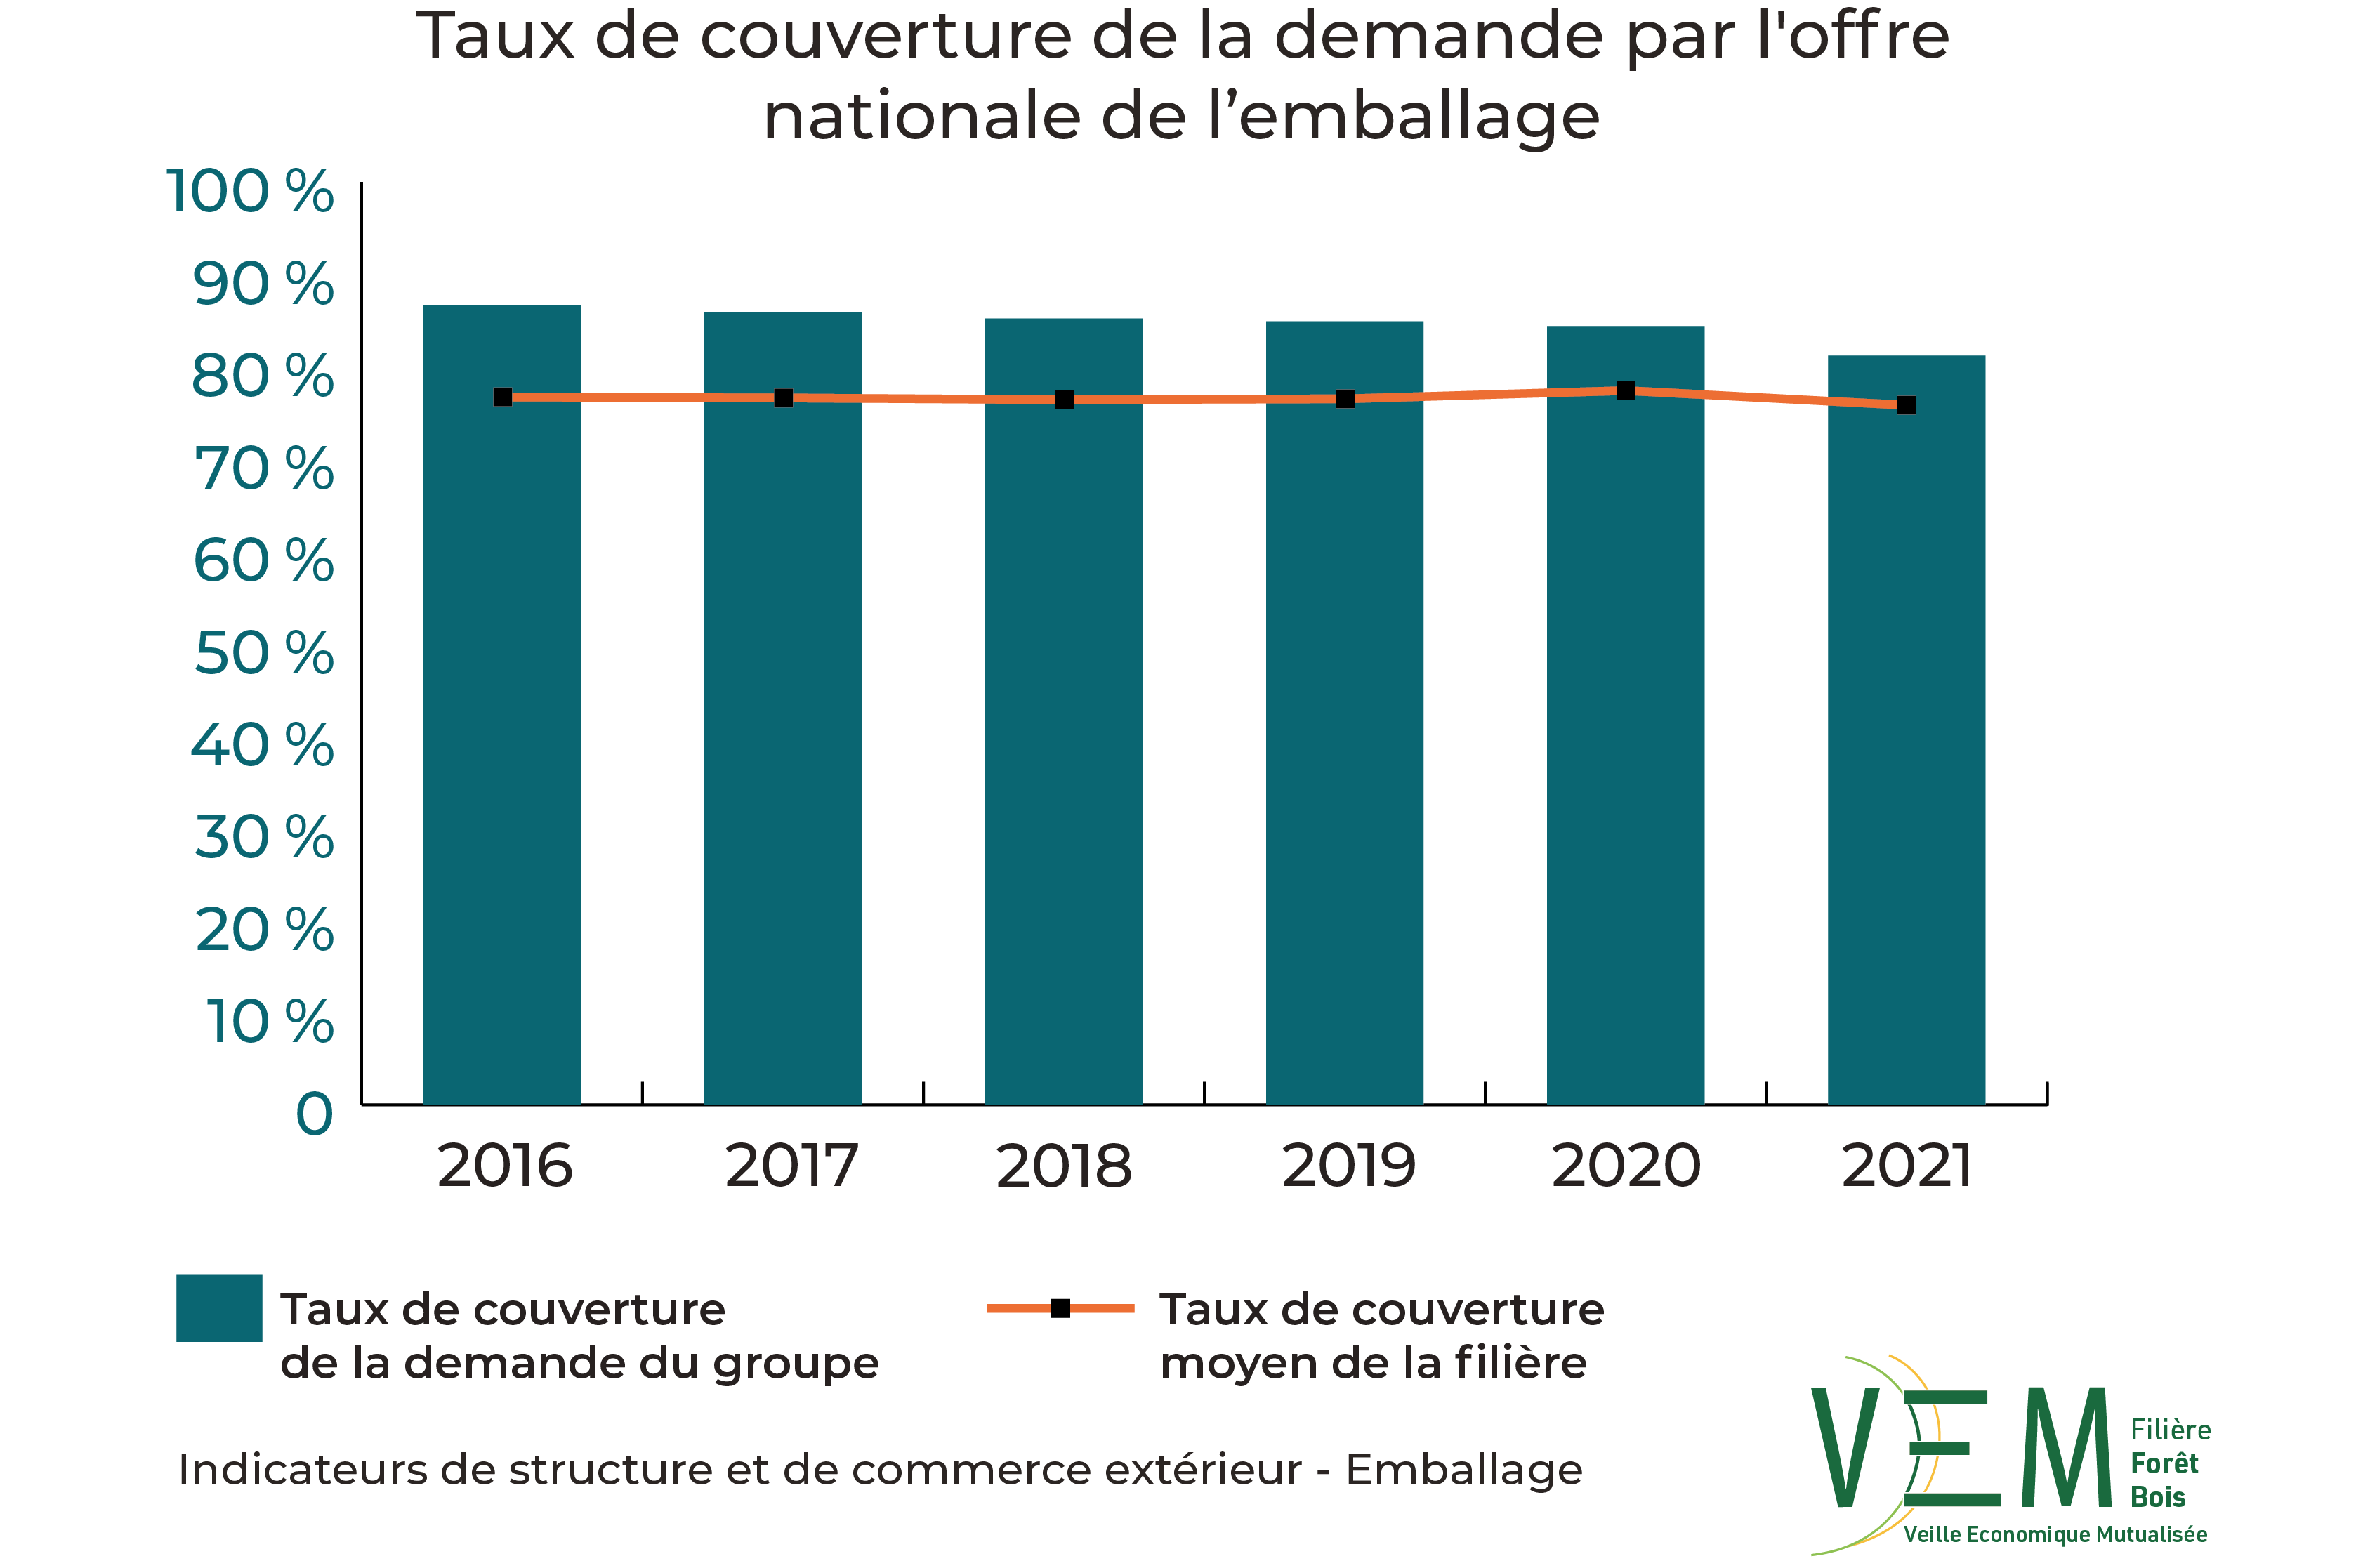 2023 ISCE TauxCouverture demande offre nationale Emballage